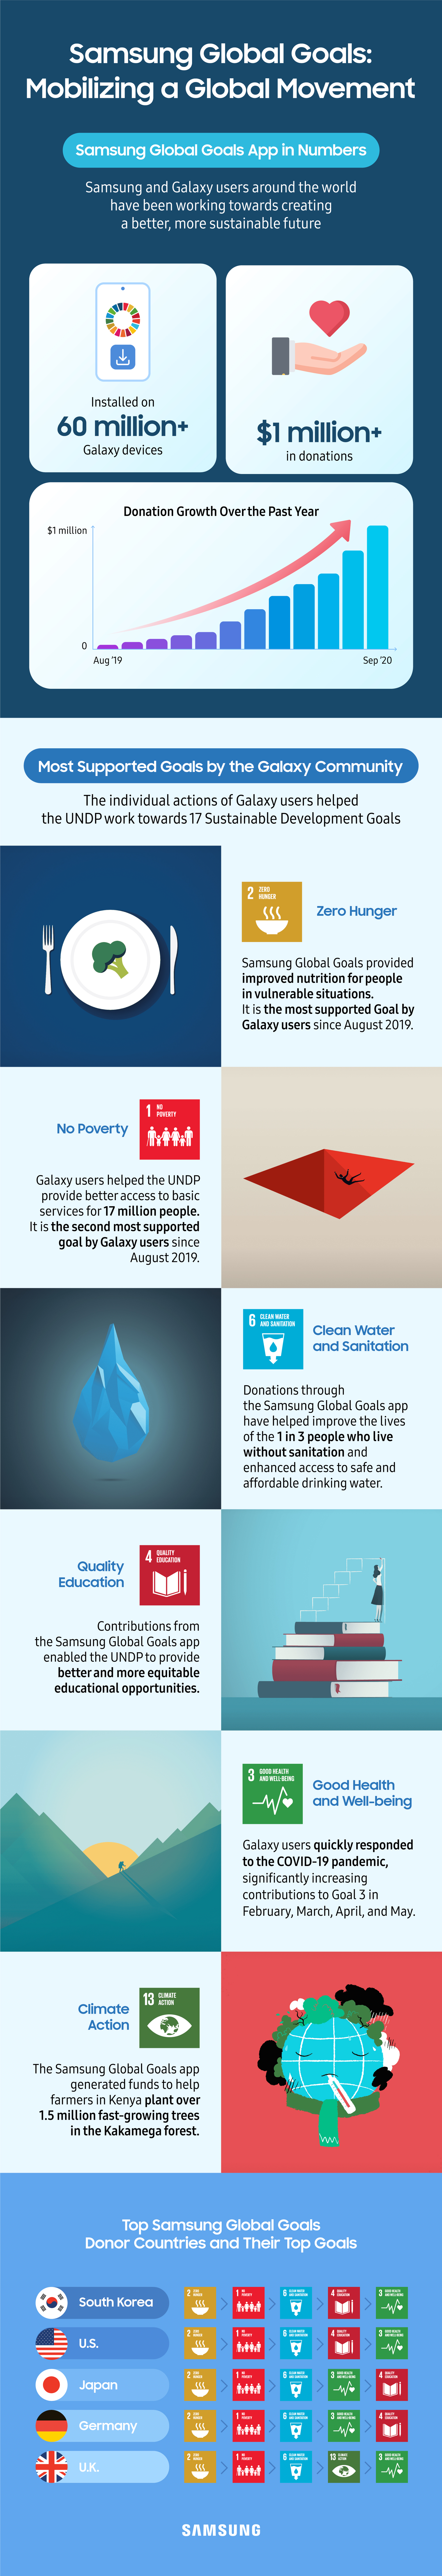 Infographic celebrating the Galaxy community contributing to $1 million in fundraising through the SGG app to help the UNDP achieve the SDGs.